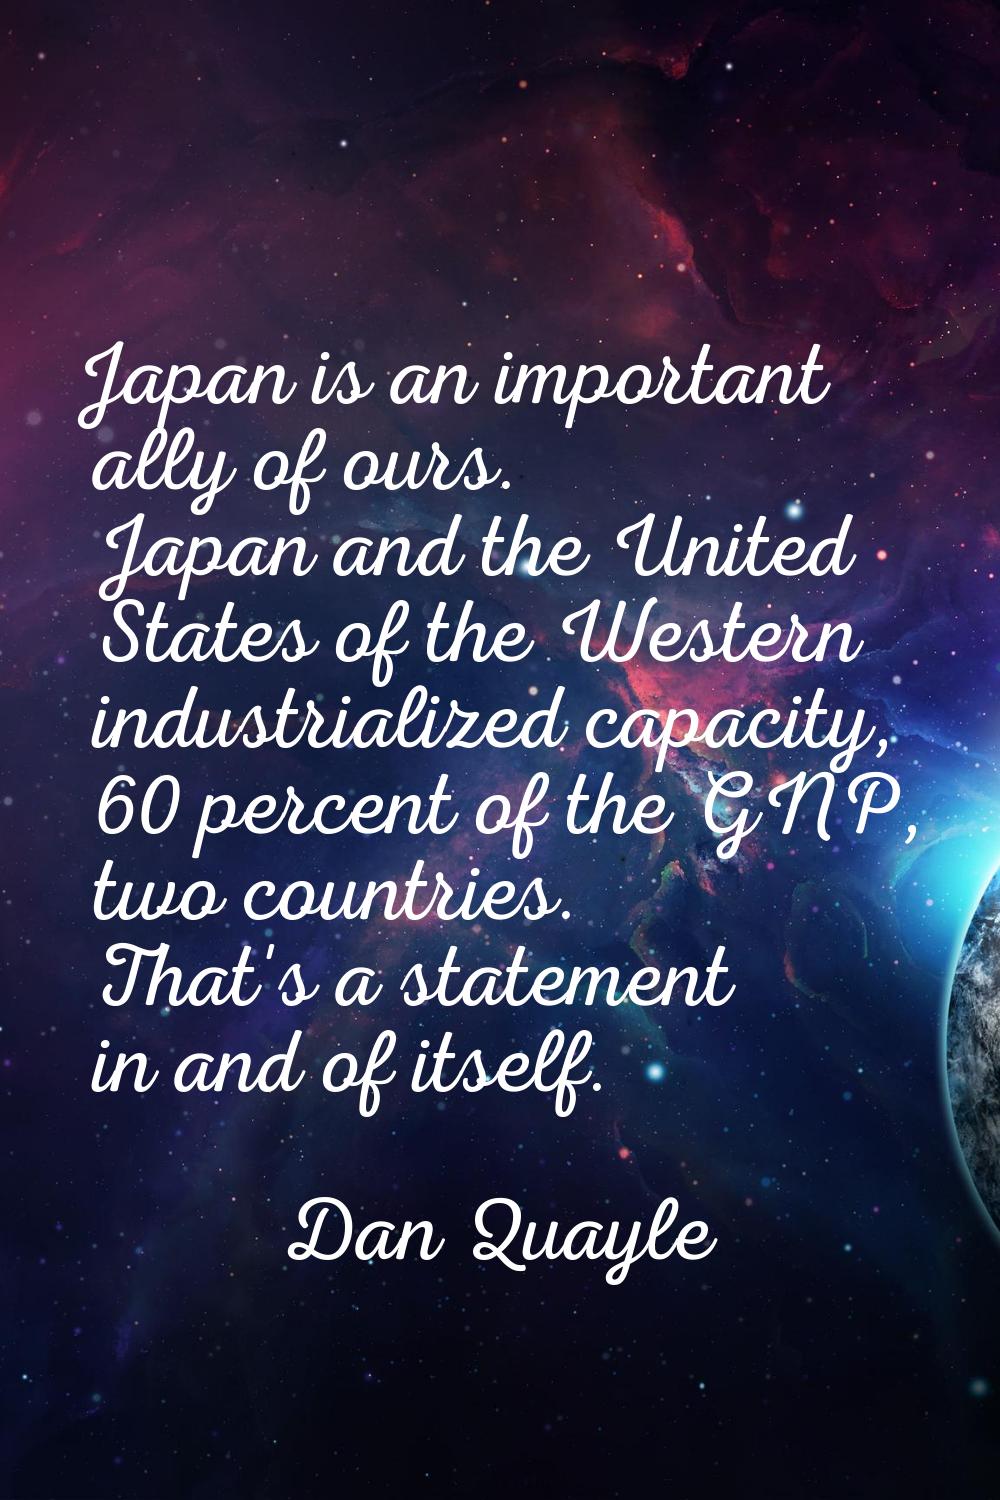 Japan is an important ally of ours. Japan and the United States of the Western industrialized capac